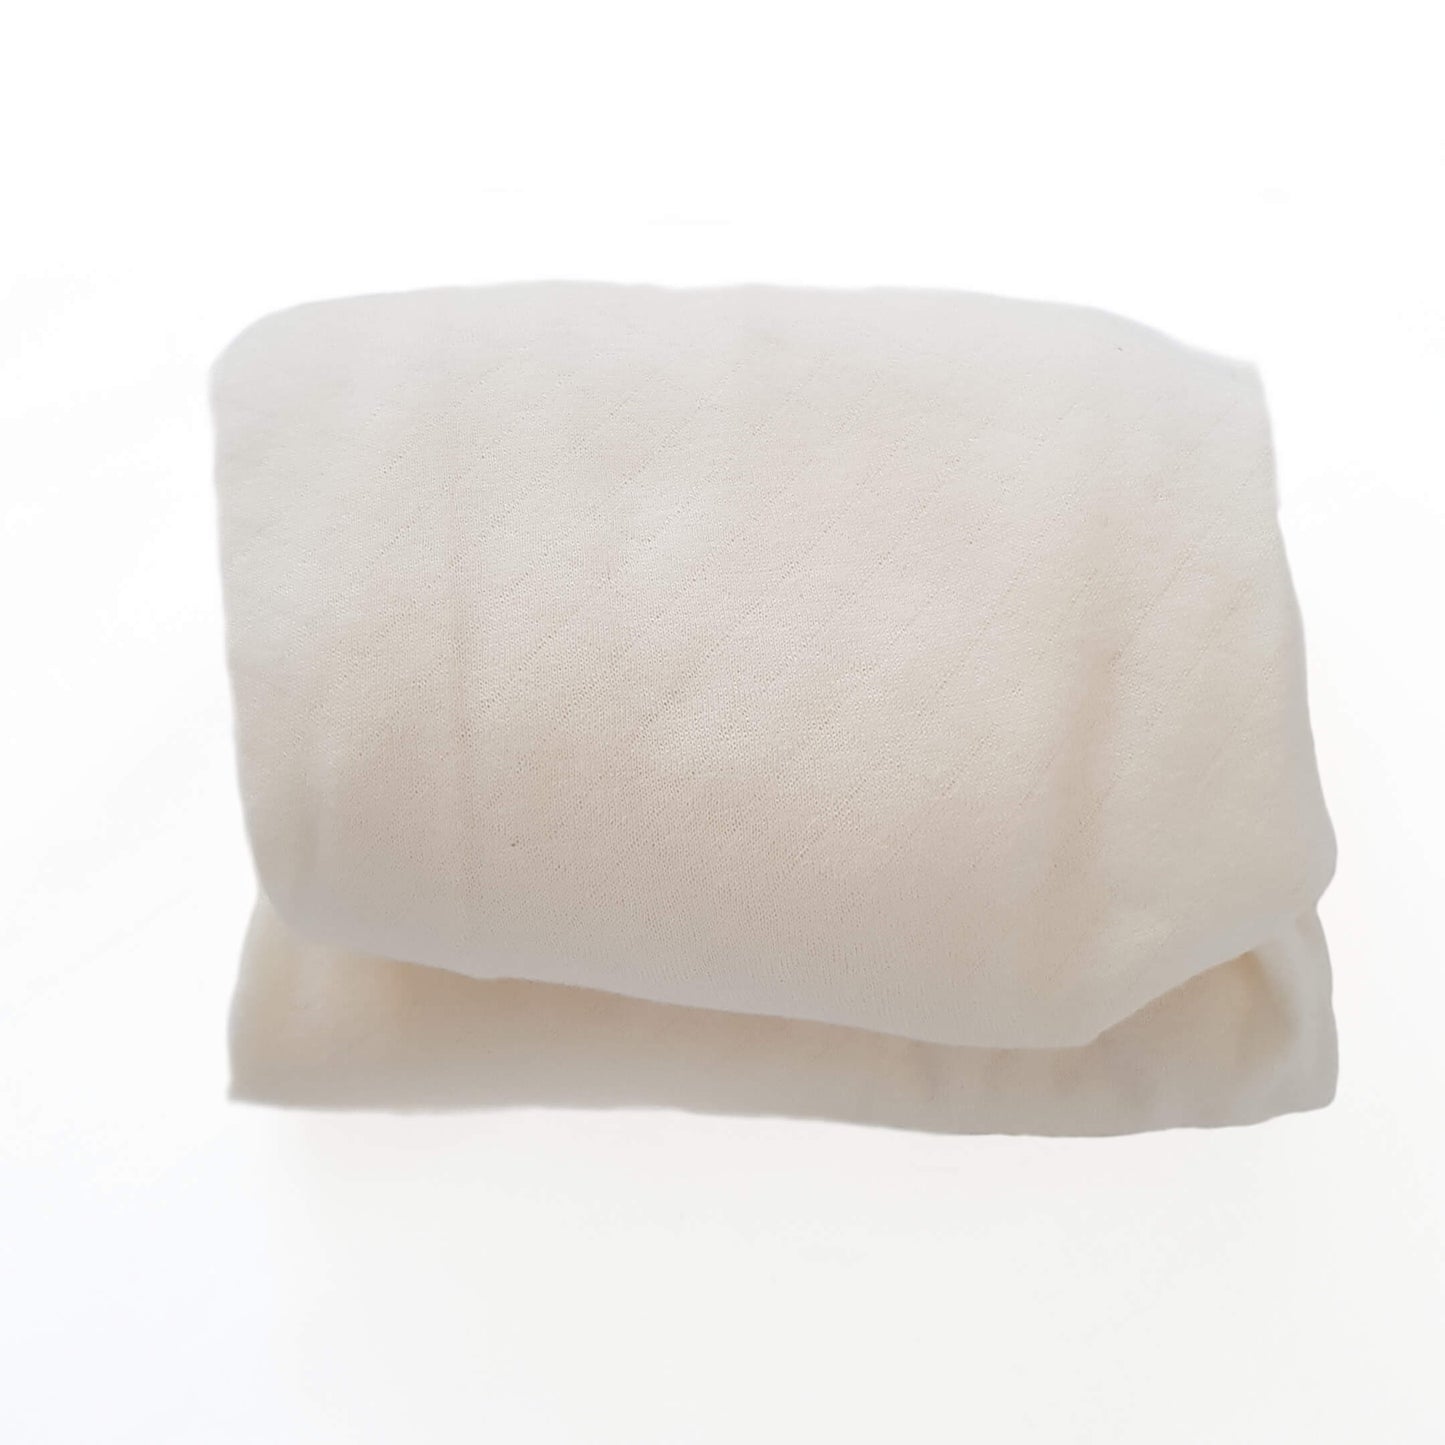 cream sheet for carrycot moses basket evcushy